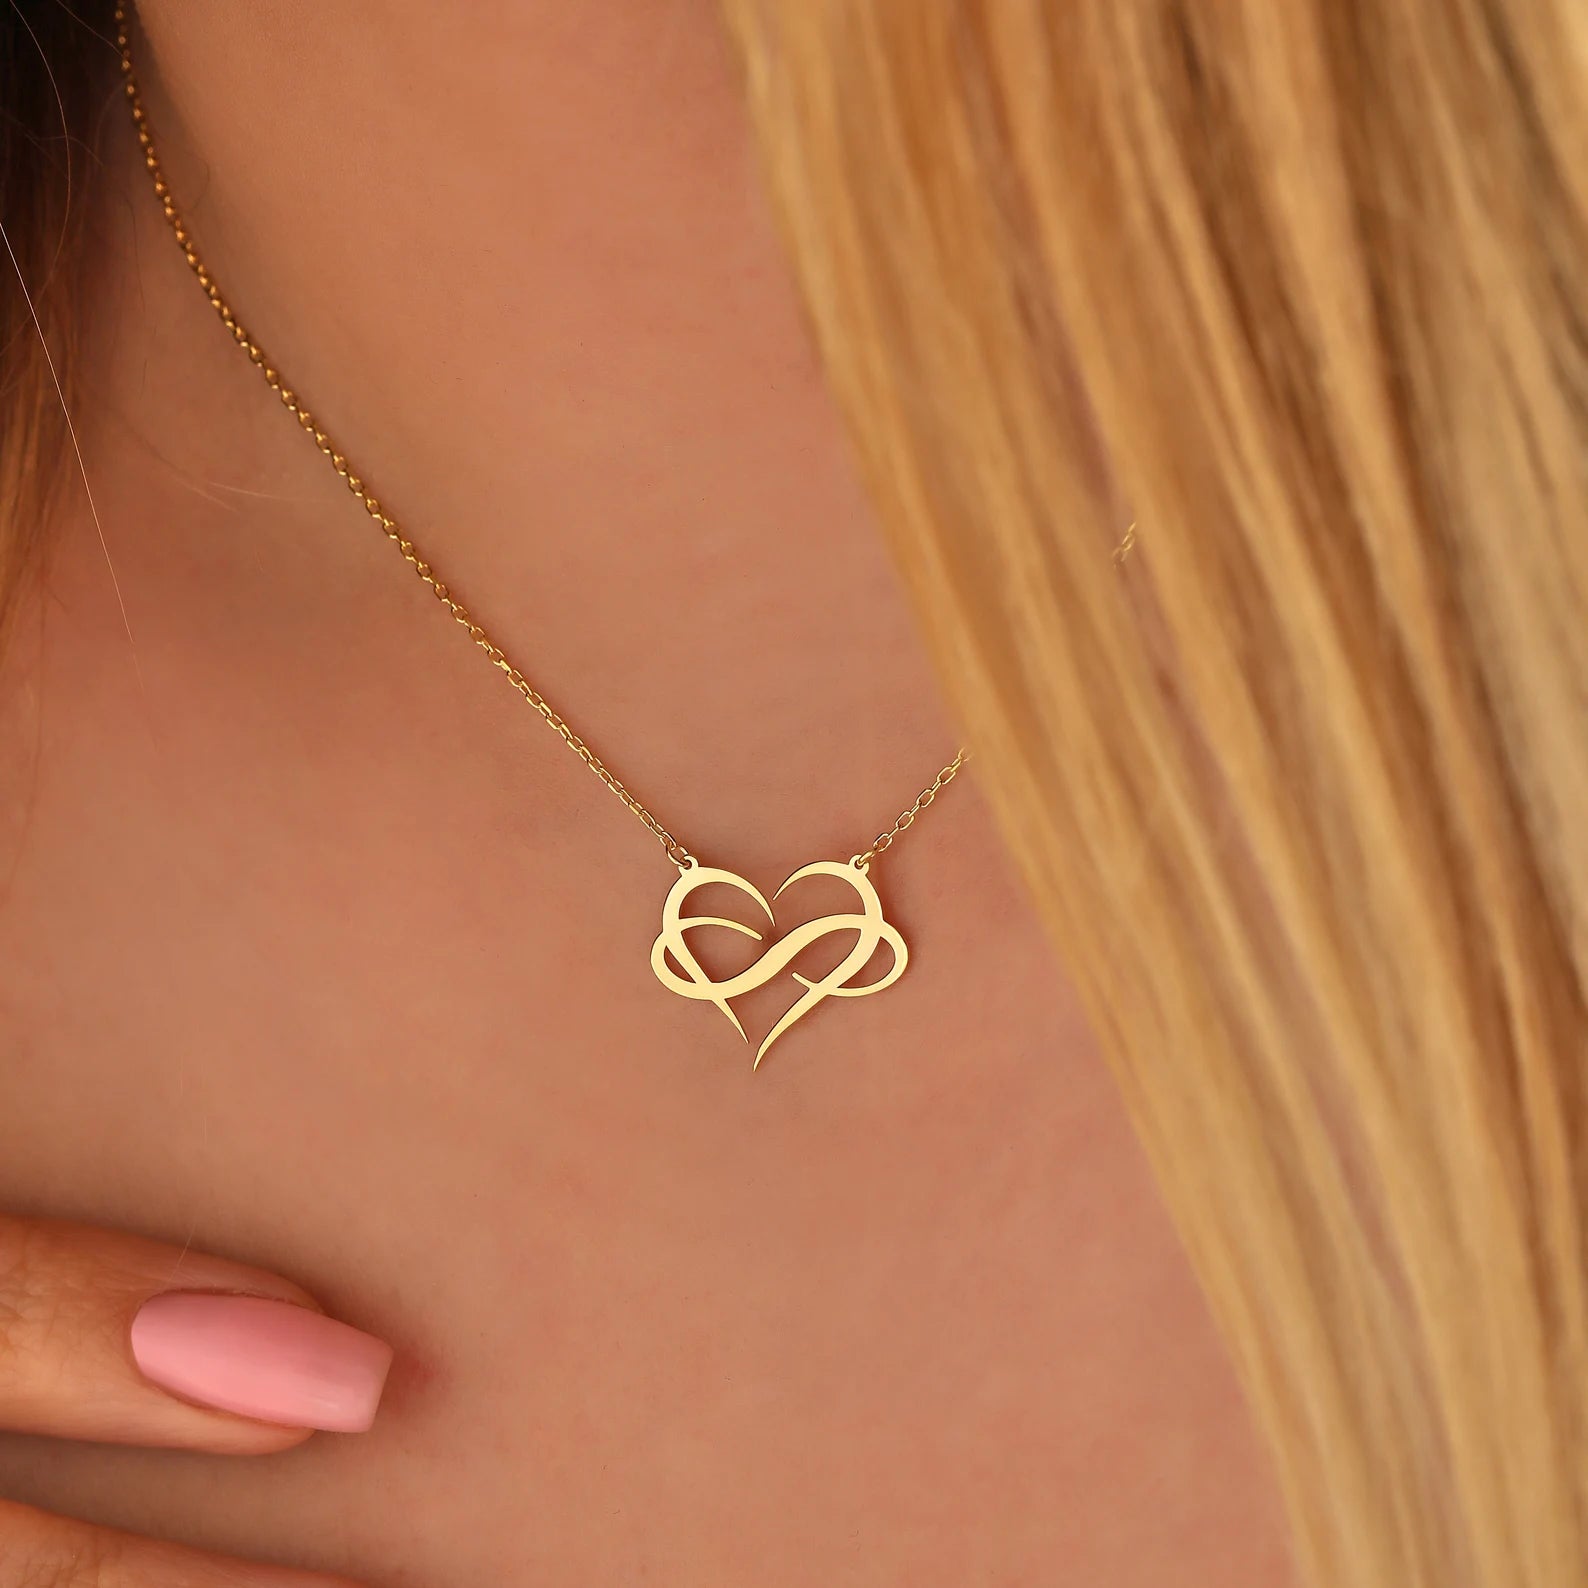 18 Carat Gold Heart Infinity Necklace - A Radiant Emblem of Eternal Connection